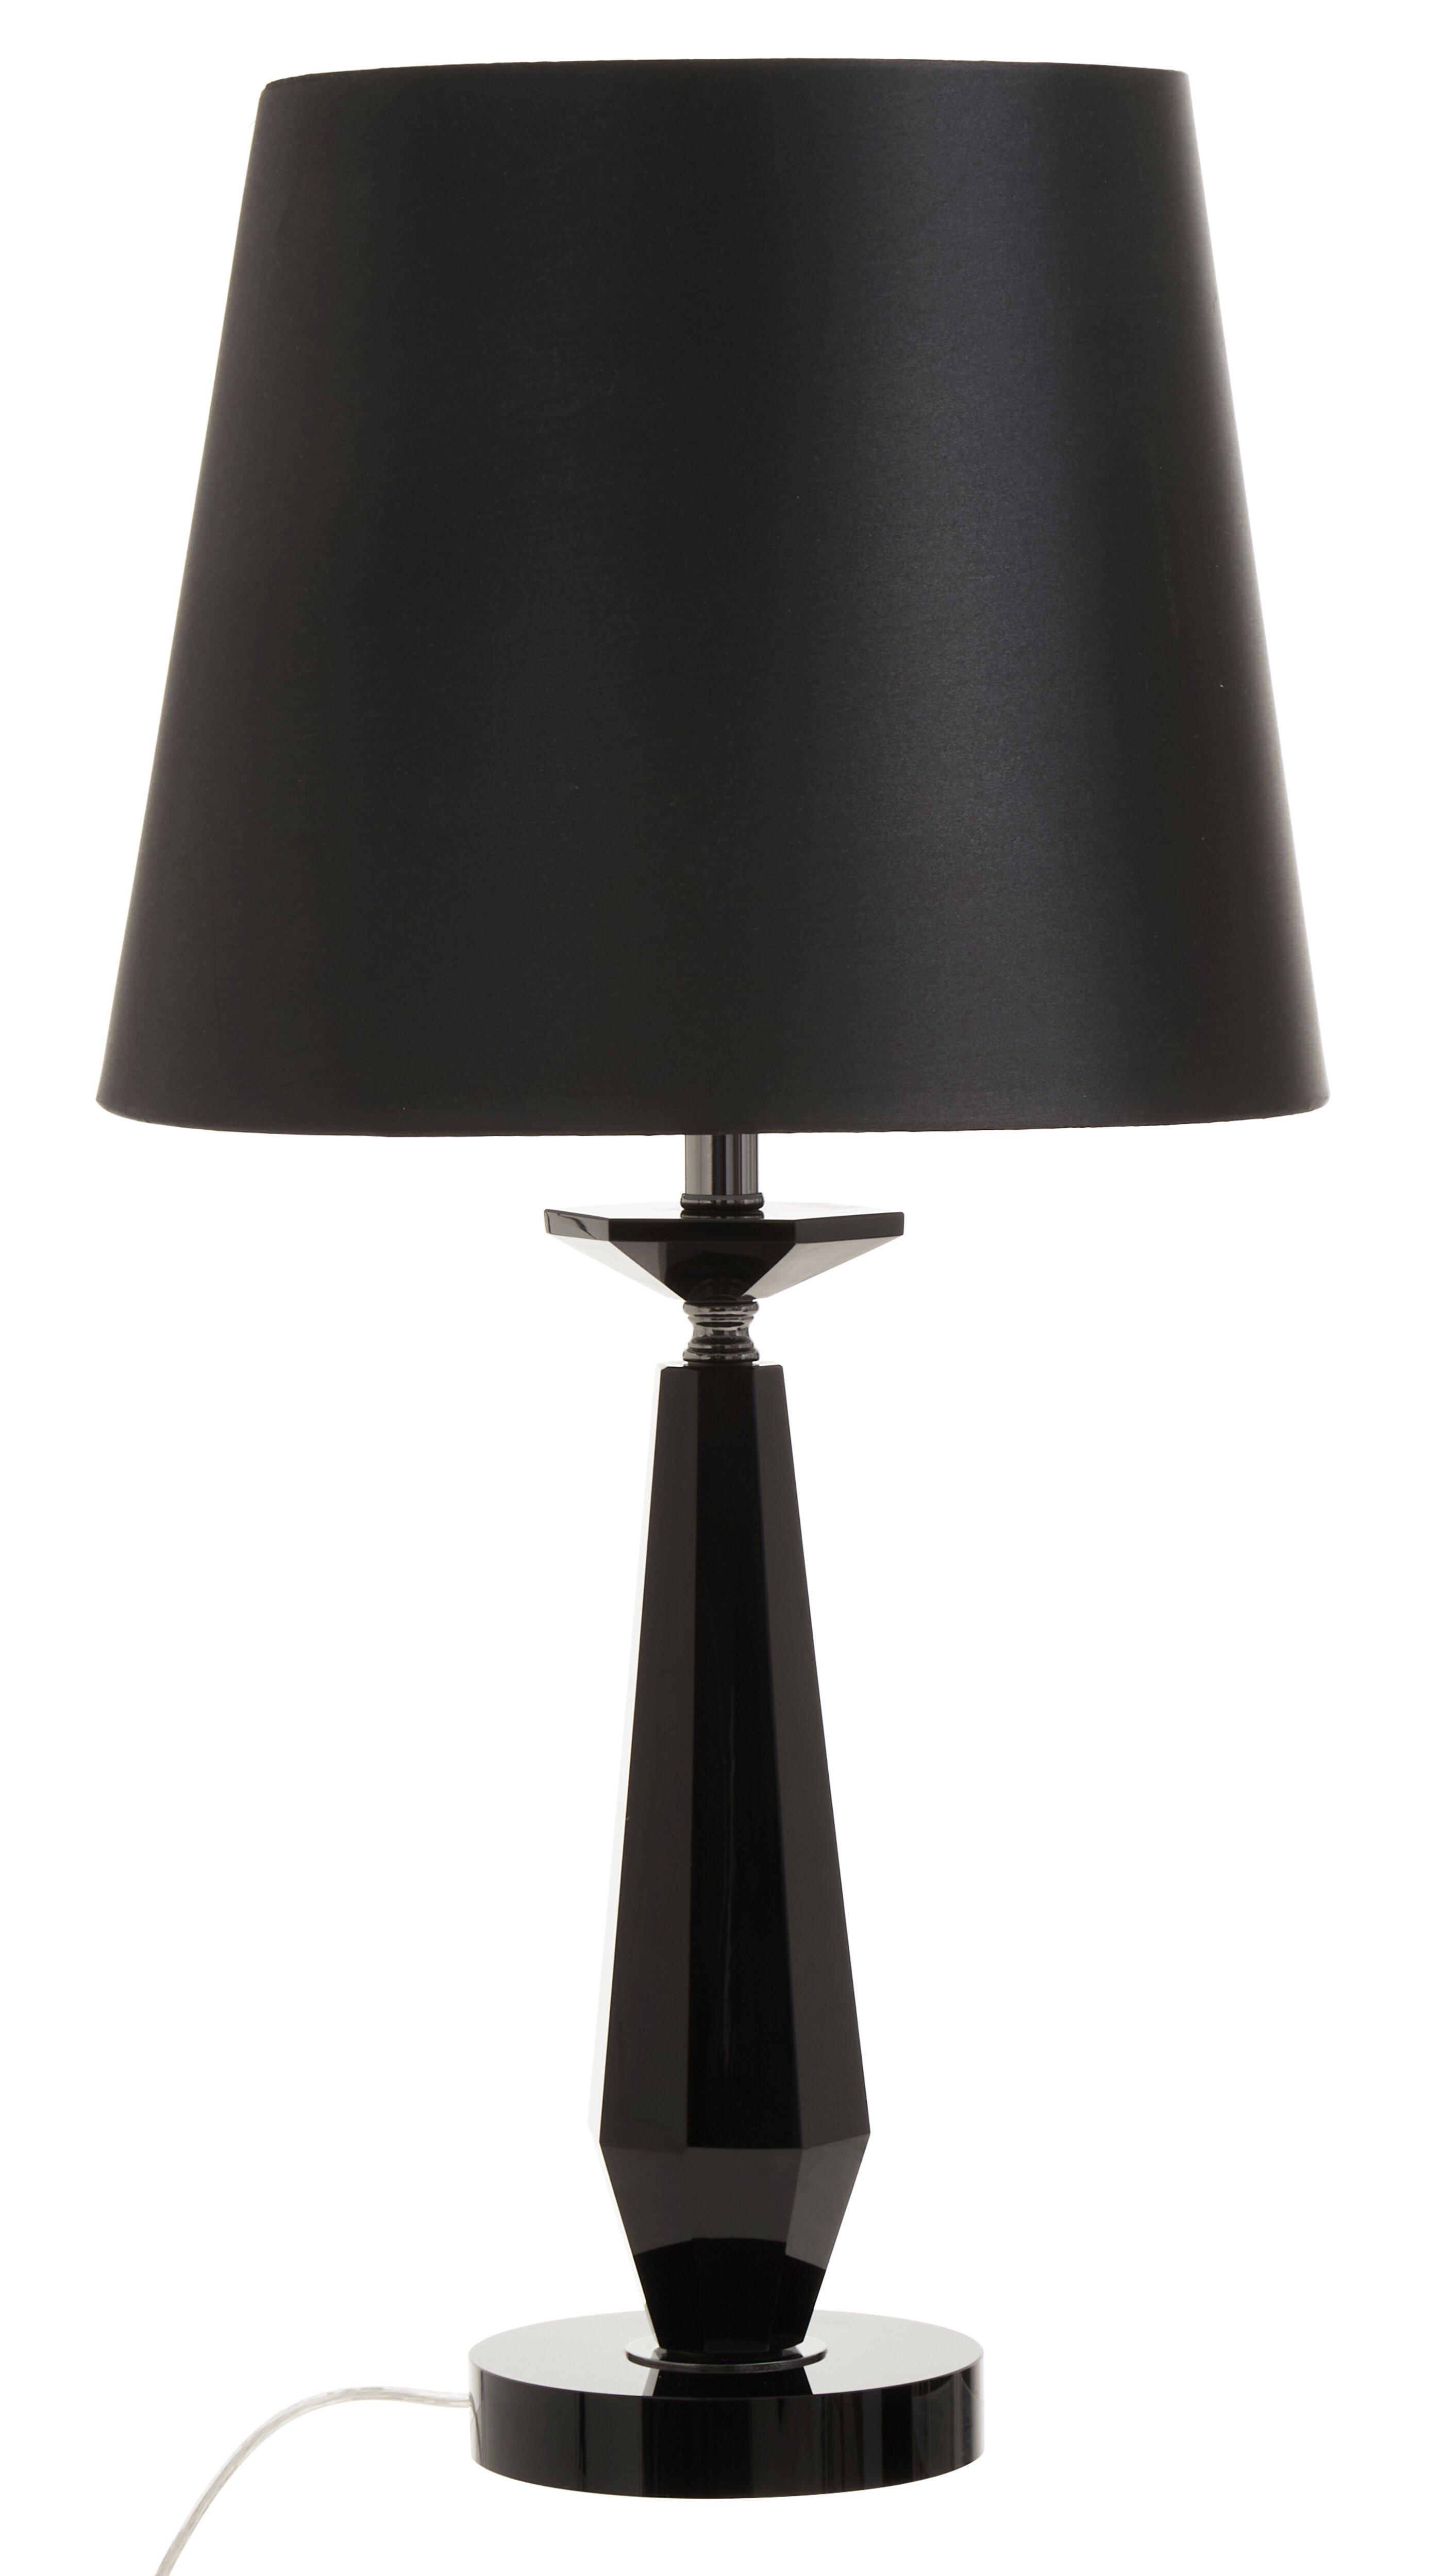 Interiors by Premier Hexum Black Crystal Table Lamp With Metal Base